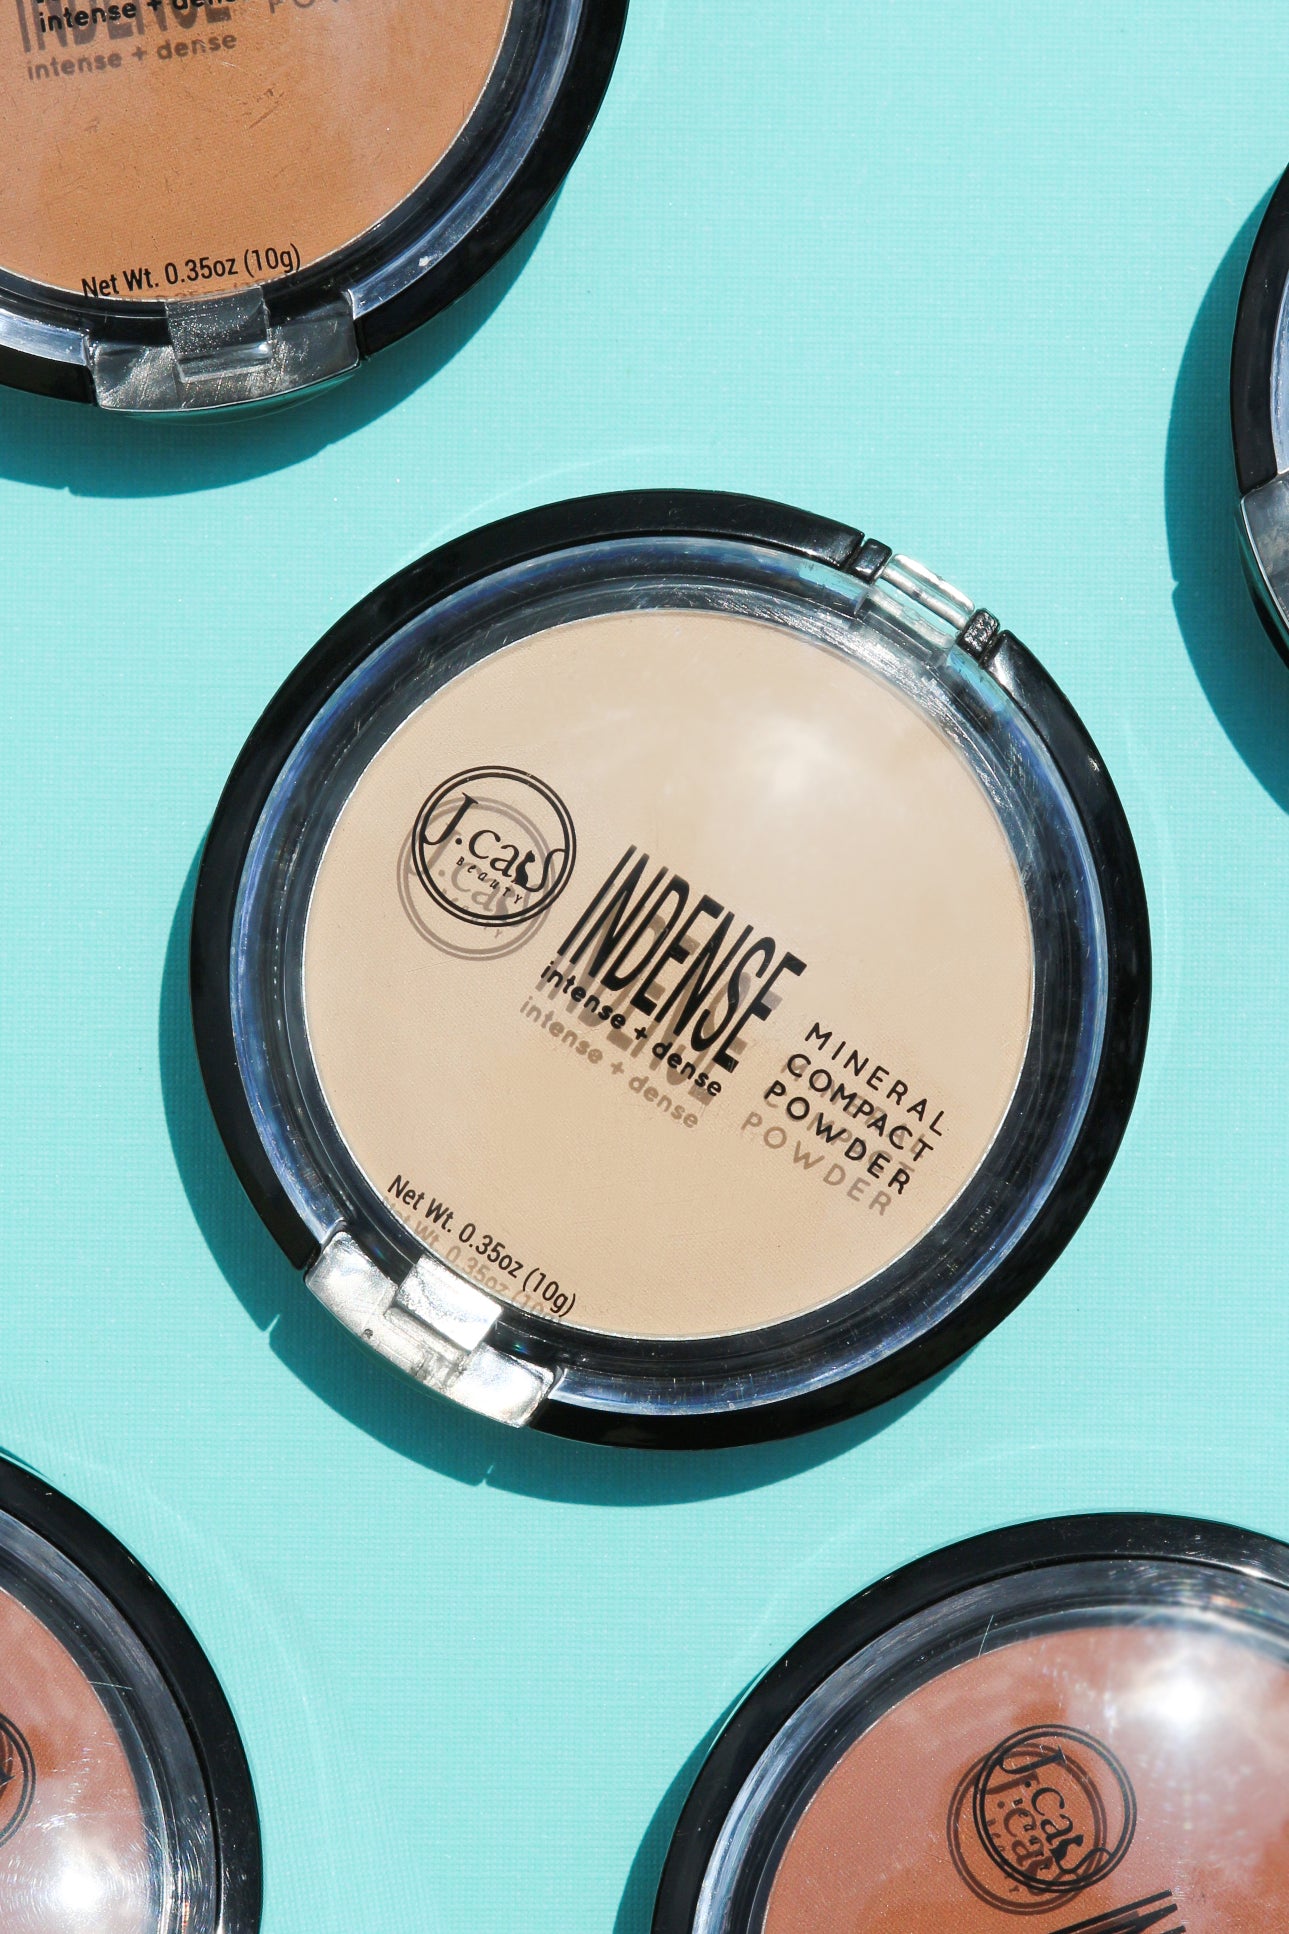 Indense Mineral Compact Powder